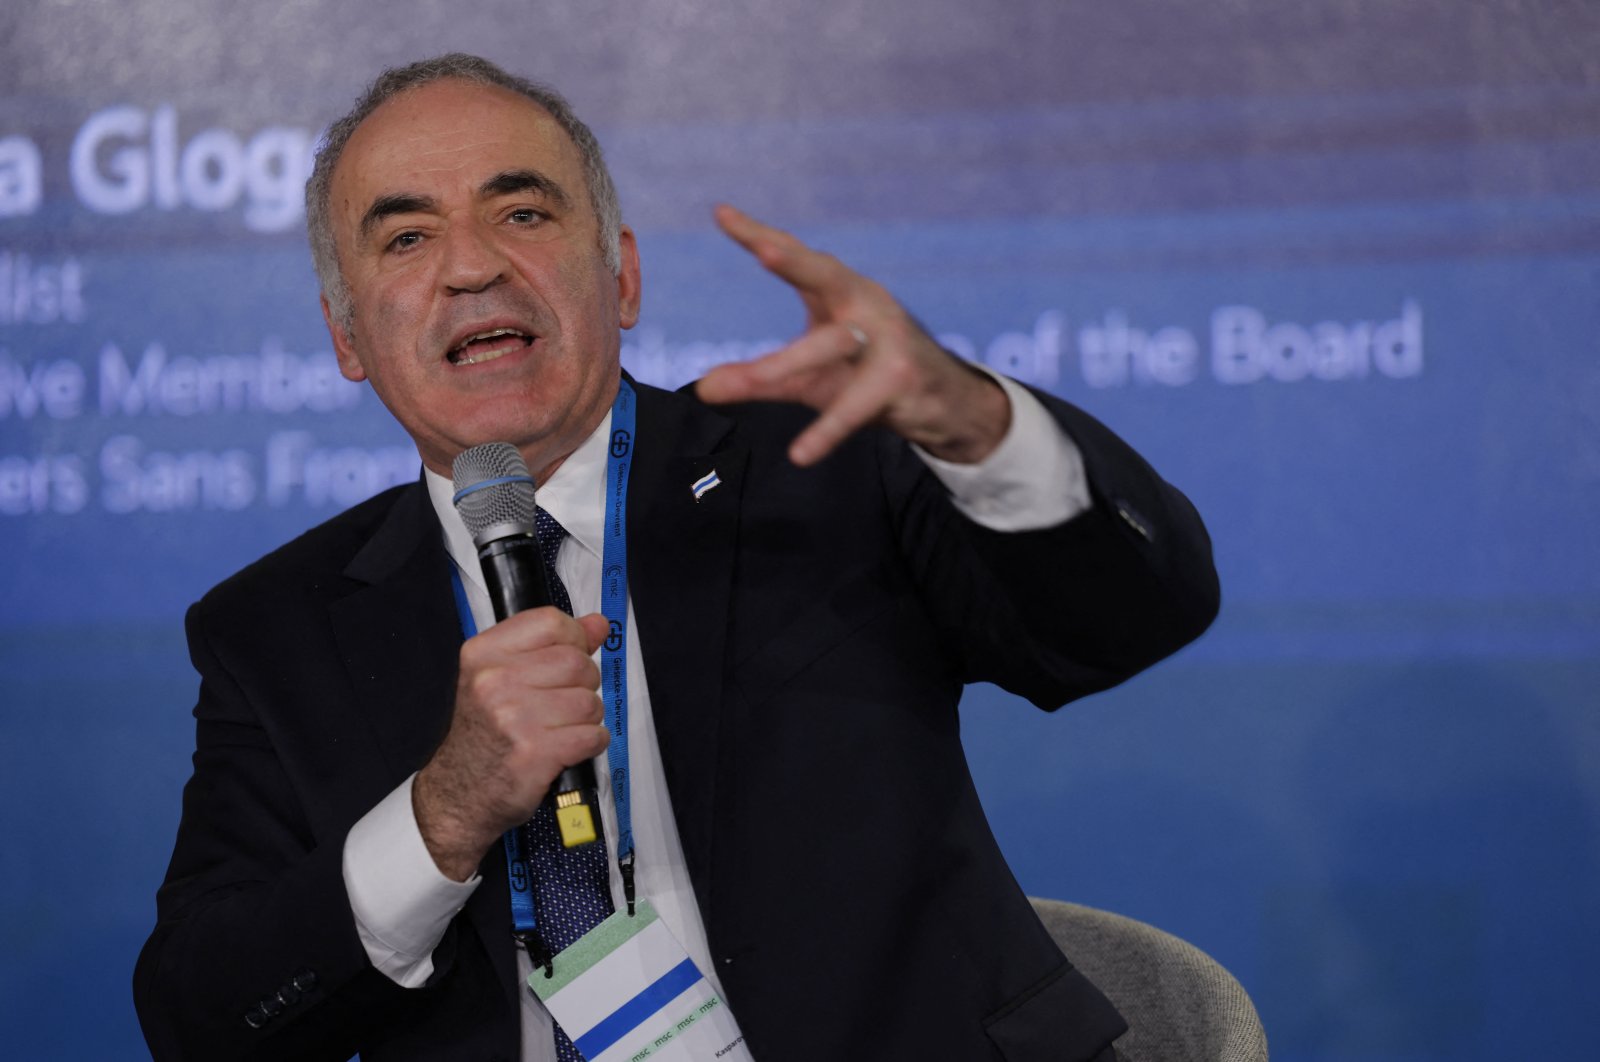 Garry Kasparov, Chairman at the Human Rights Foundation and Founder and Chairman of the Renew Democracy Initiative speaks during a panel discussion at the Munich Security Conference (MSC), Munich, Germany, Feb. 18, 2023. (AFP Photo)